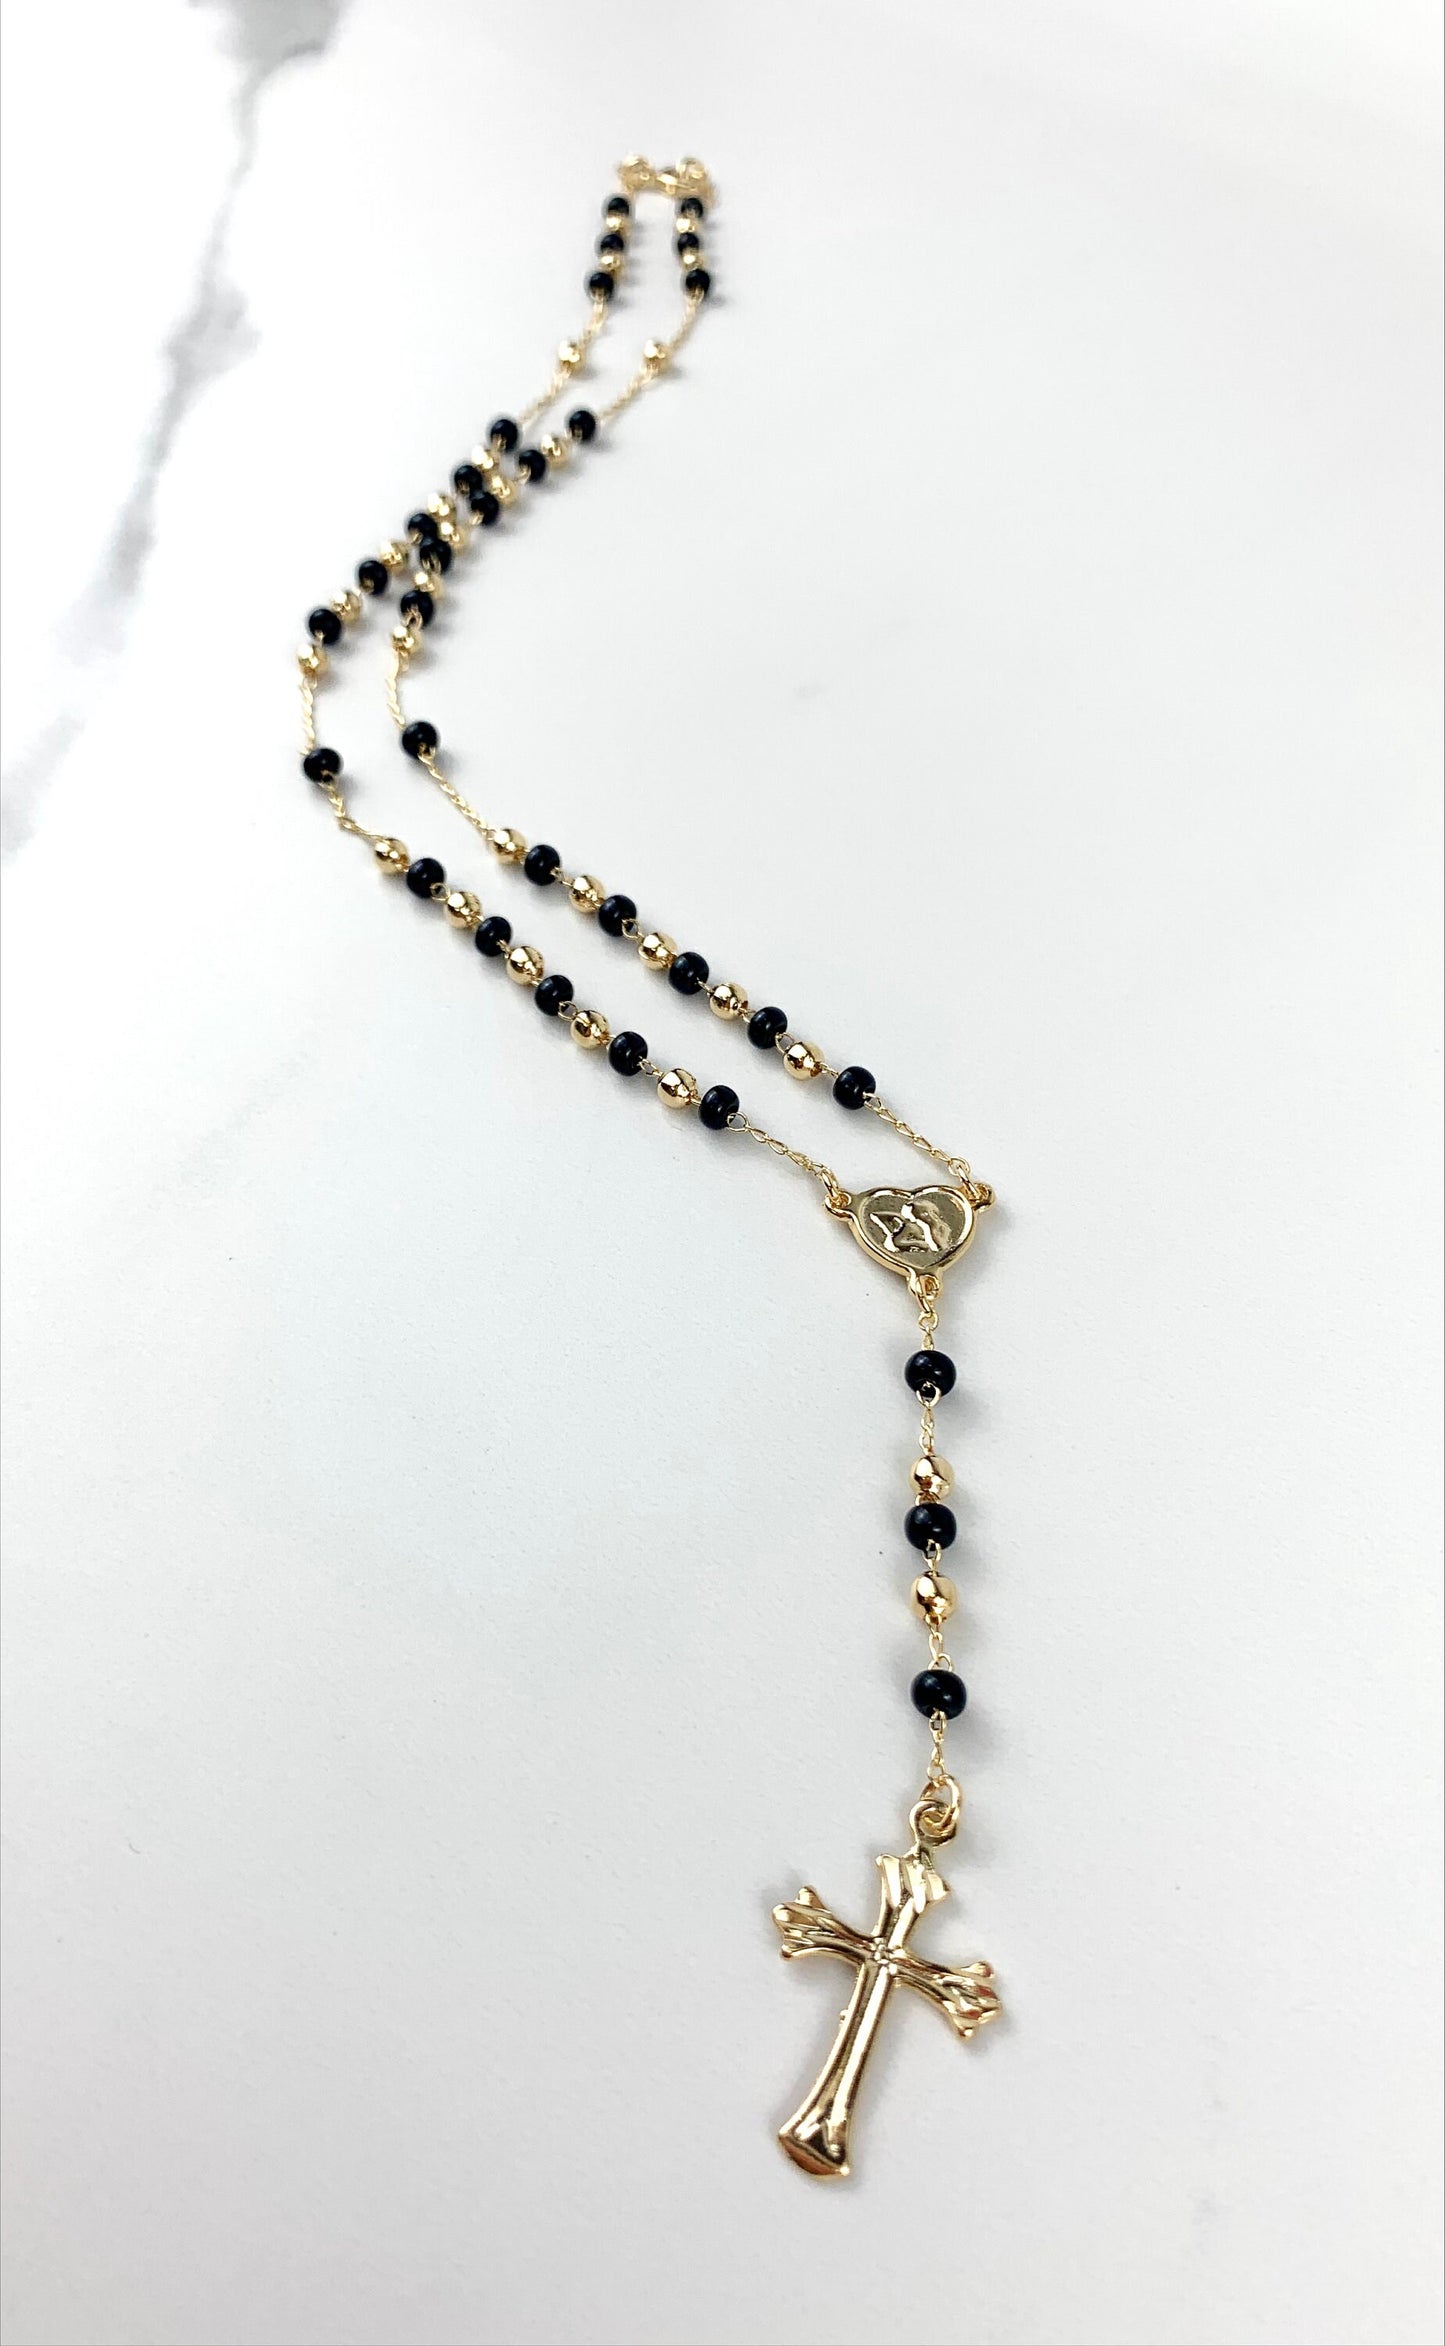 18k Gold Filled Black & Gold Beads, Heart Shape Angel Rosary Necklace, Religious Jewelry, Wholesale Jewelry Making Supplies